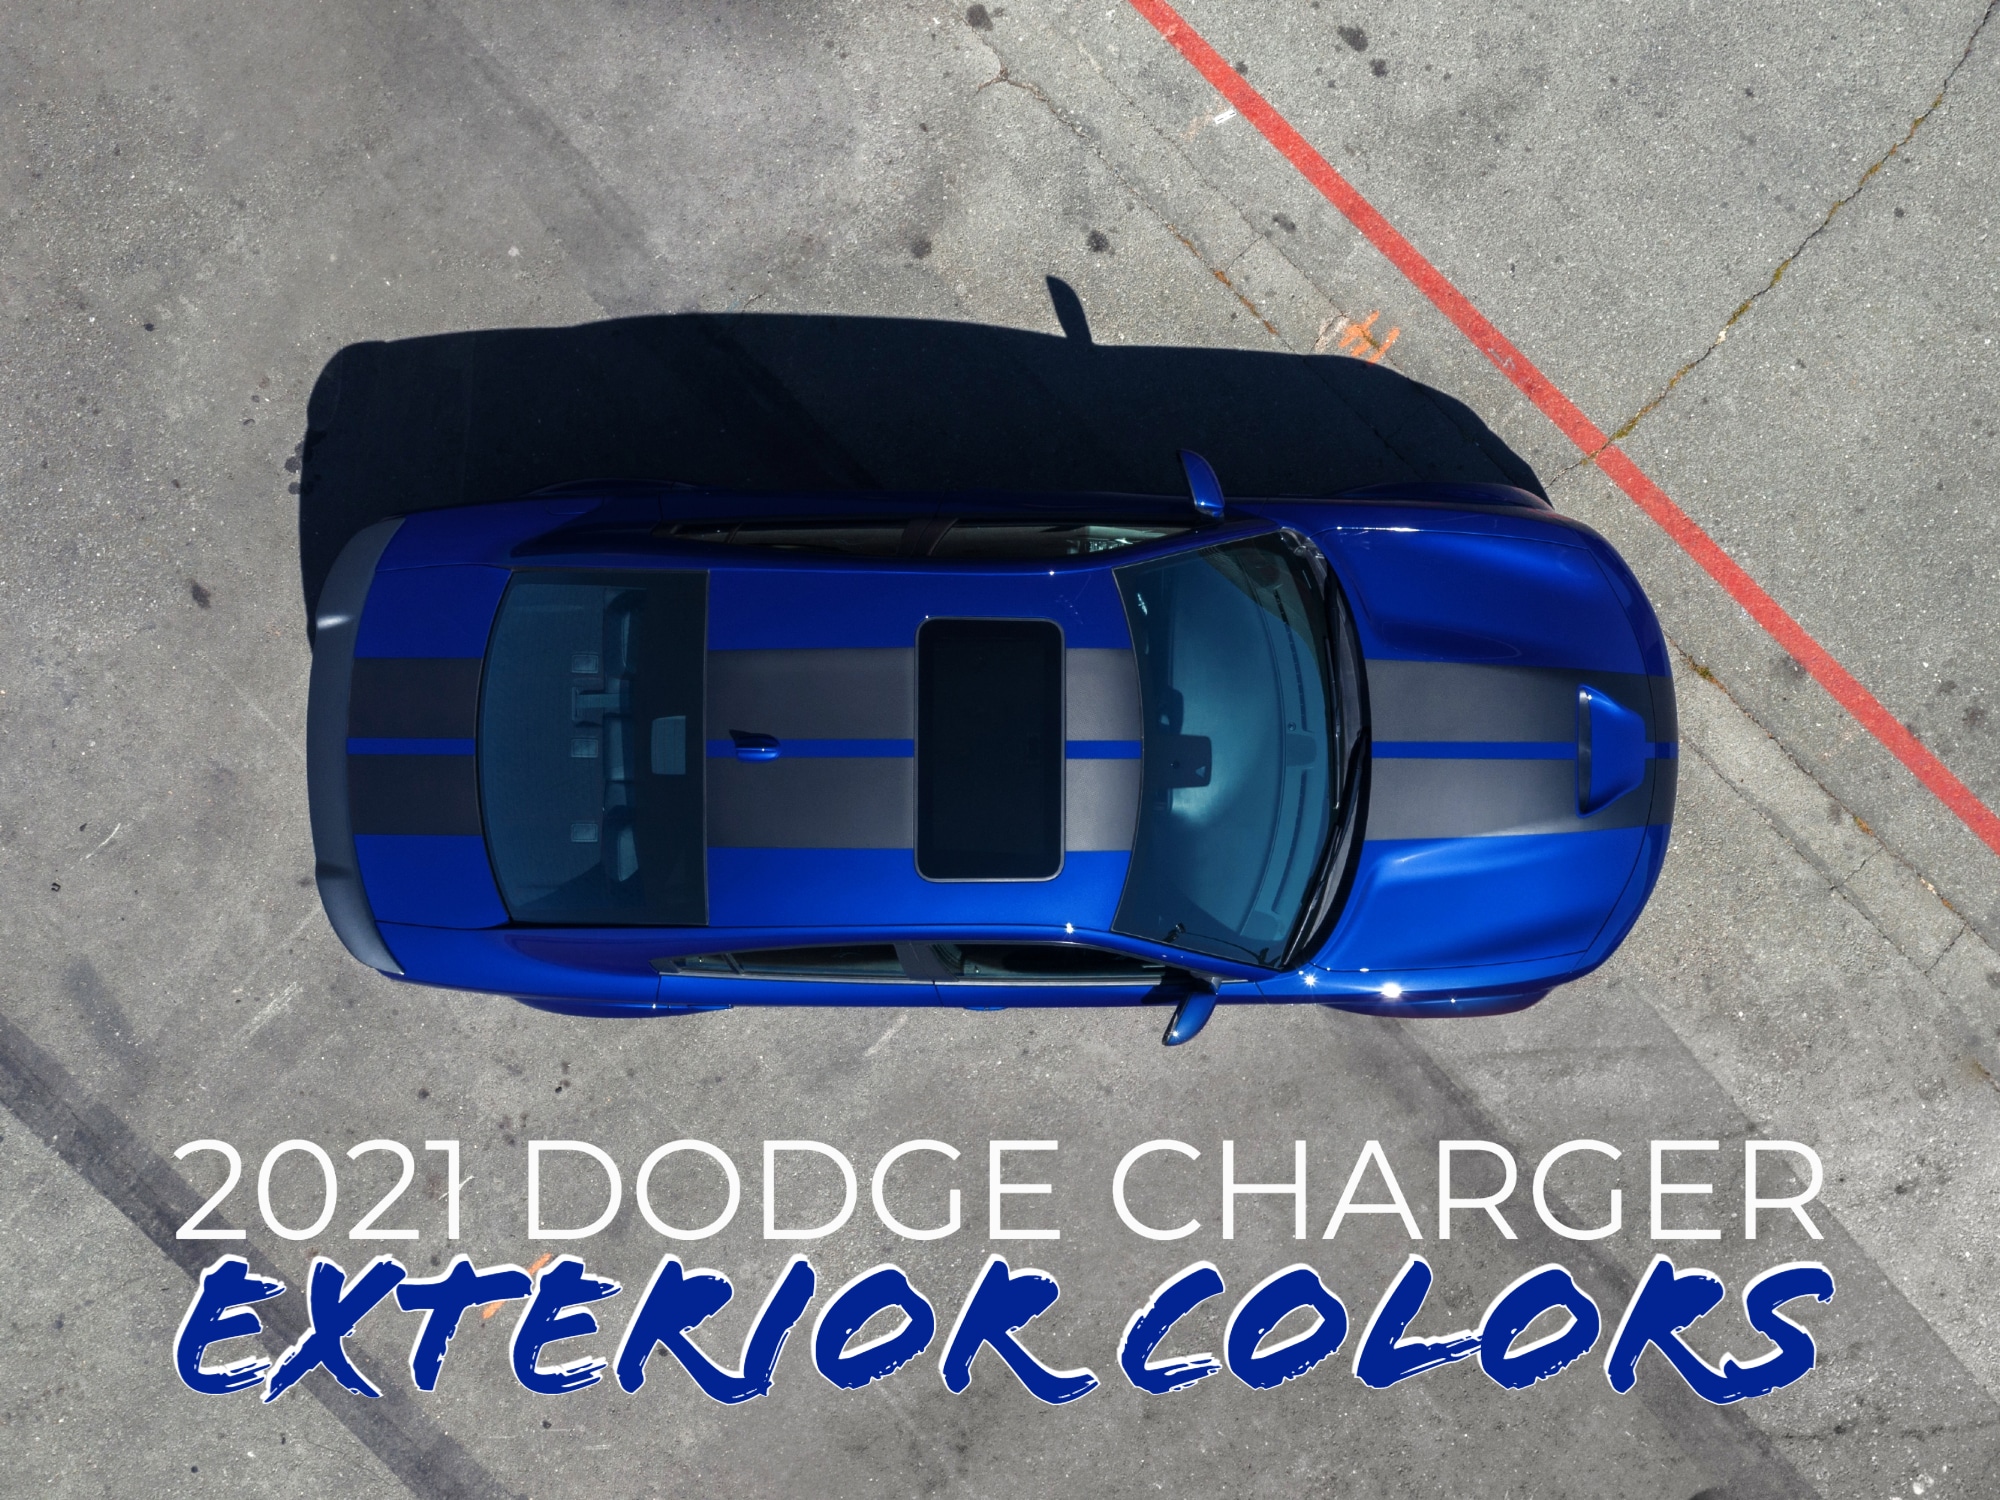 Top down view of 2021 Dodge Charger in blue